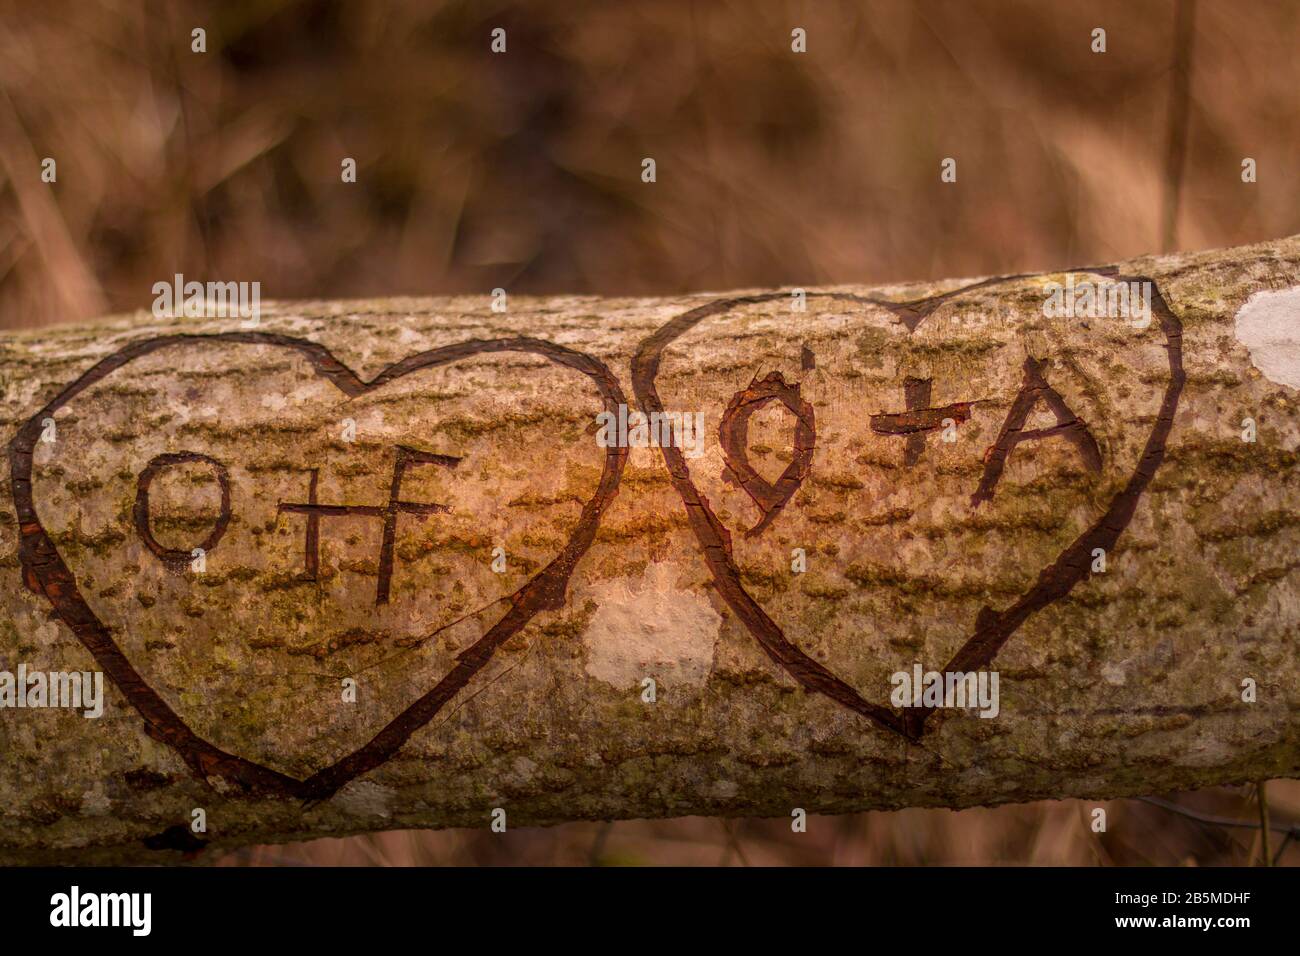 Intials and heart carved in tree with blured background Stock Photo